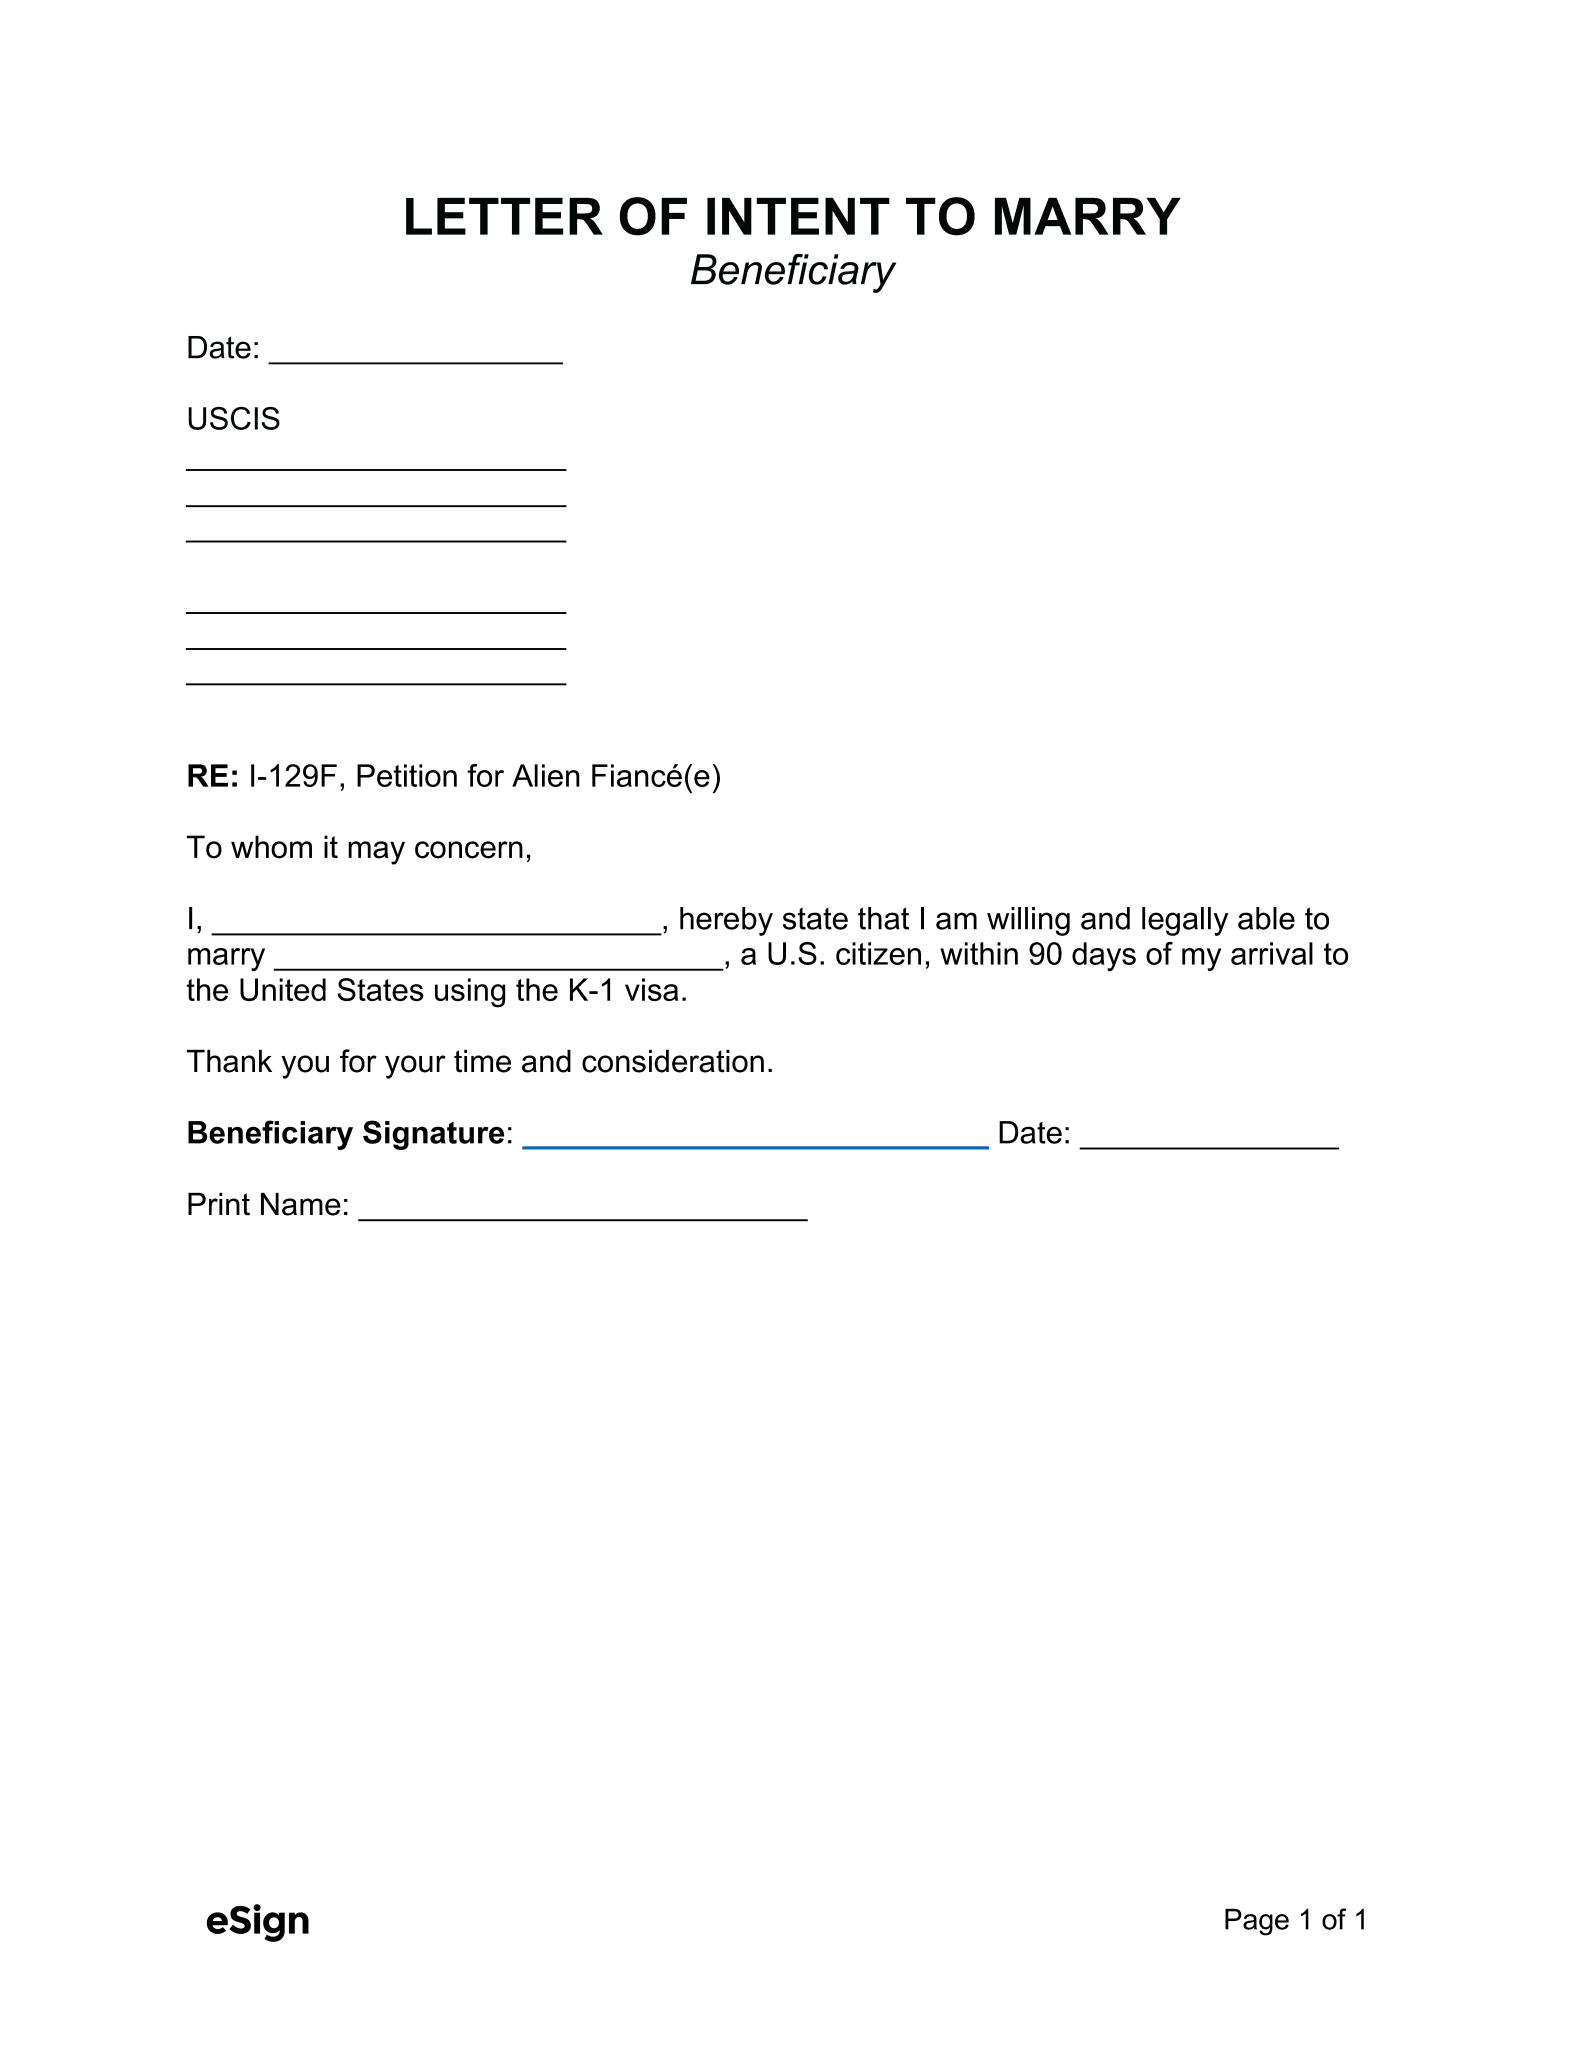 free-letter-of-intent-to-marry-within-90-days-pdf-word